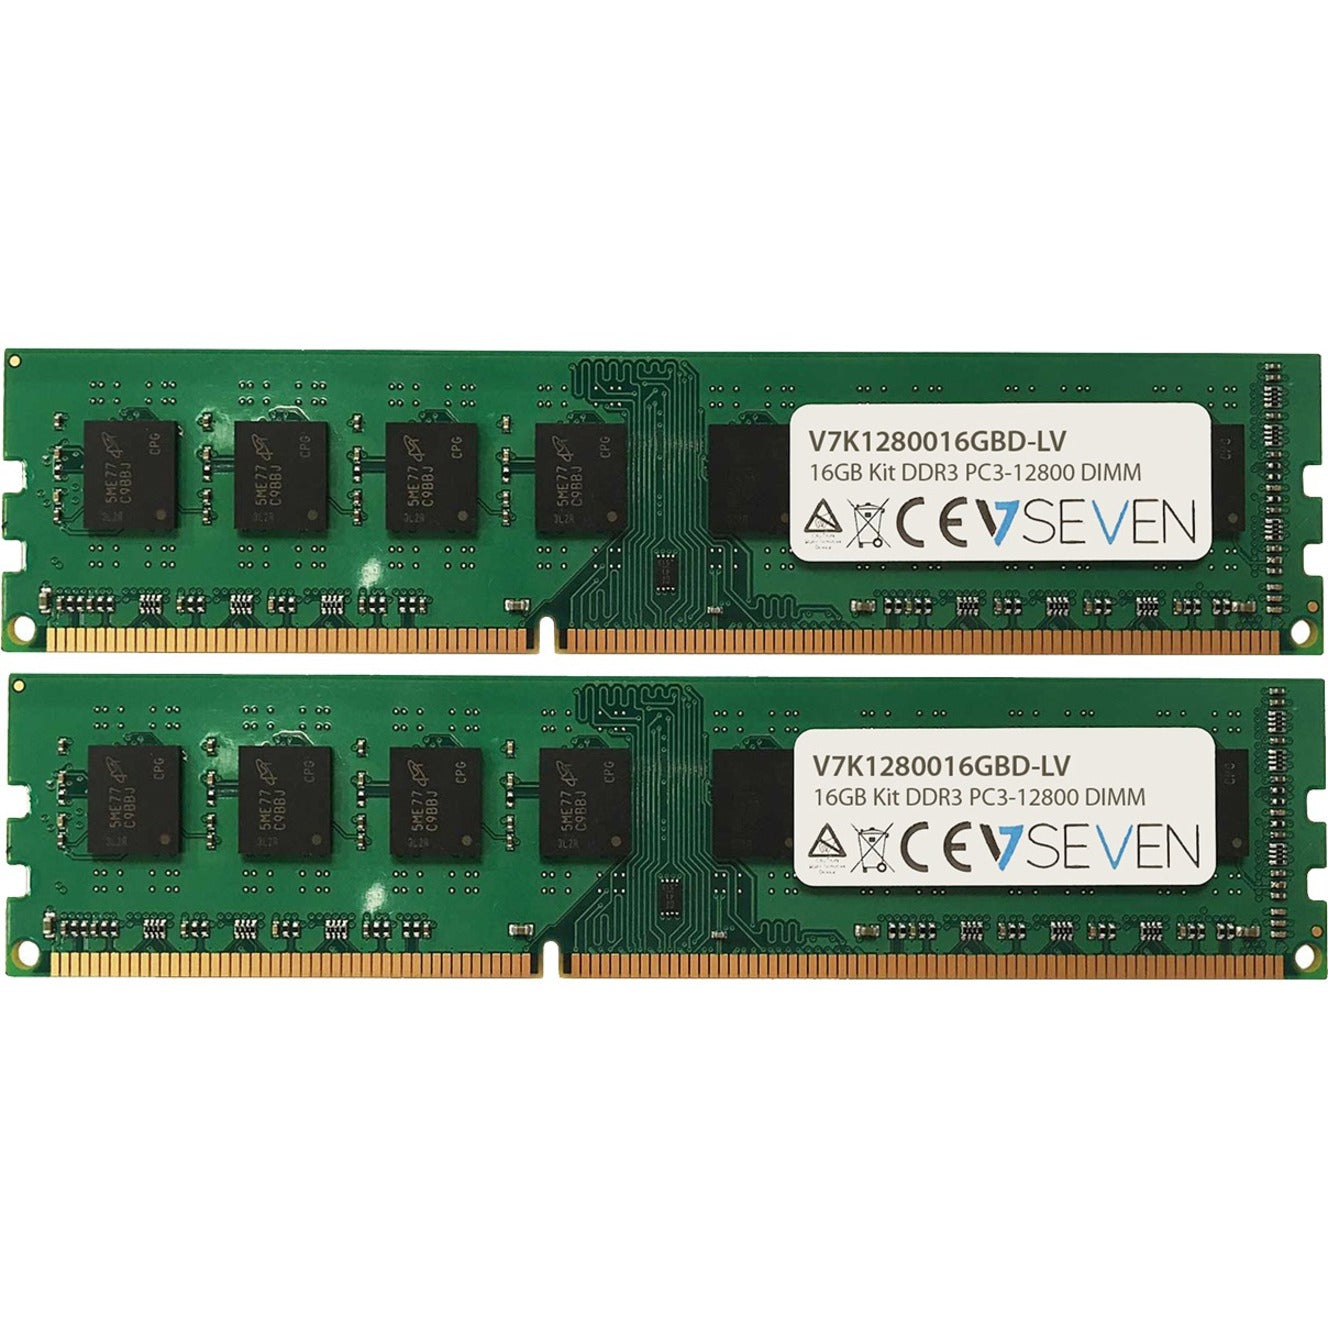 V7 V7K1280016GBD-LV 16GB (2 x 8GB) DDR3 SDRAM Memory Kit, 10 Year Warranty, RoHS Certified